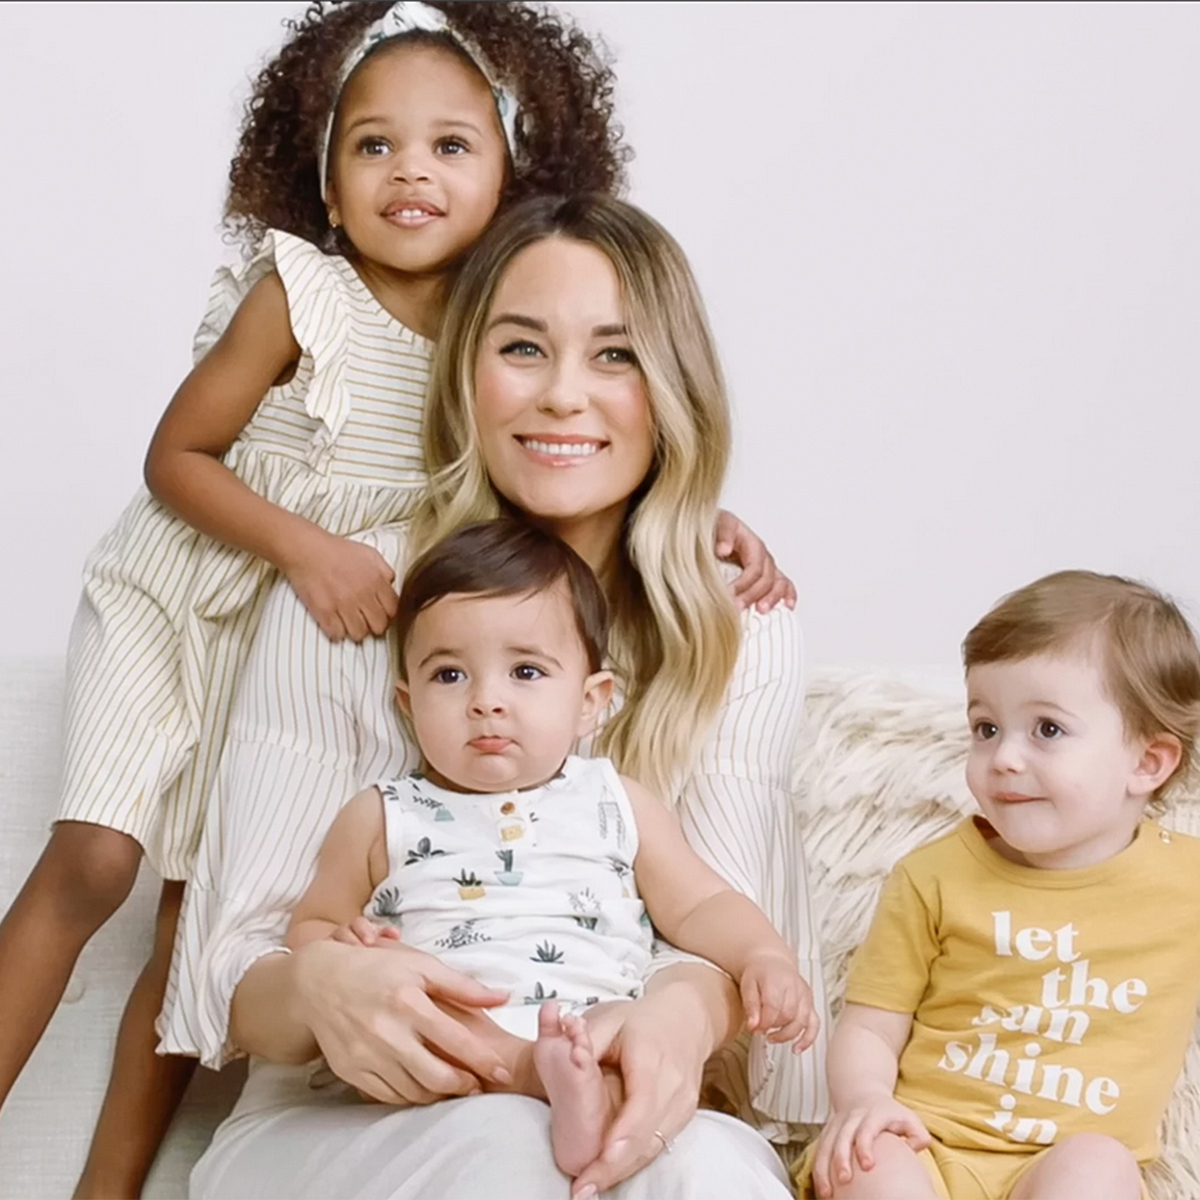 Up to 45% Off New LC Lauren Conrad Mommy & Me Apparel for Kohl's